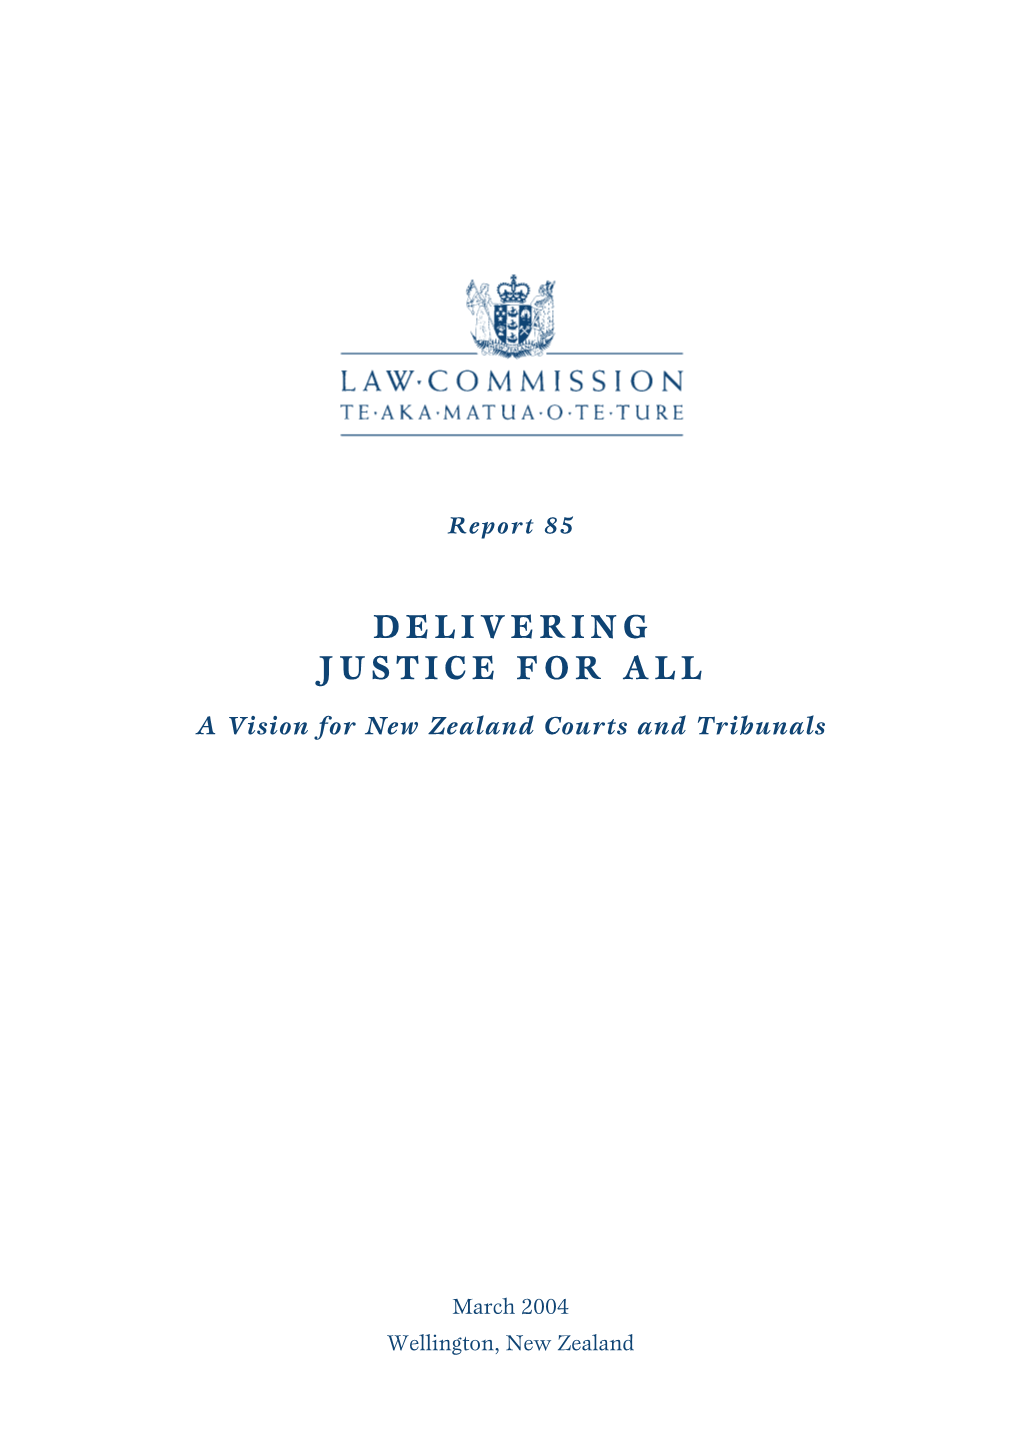 Delivering Justice for All: a Vision for New Zealand Courts and Tribunals